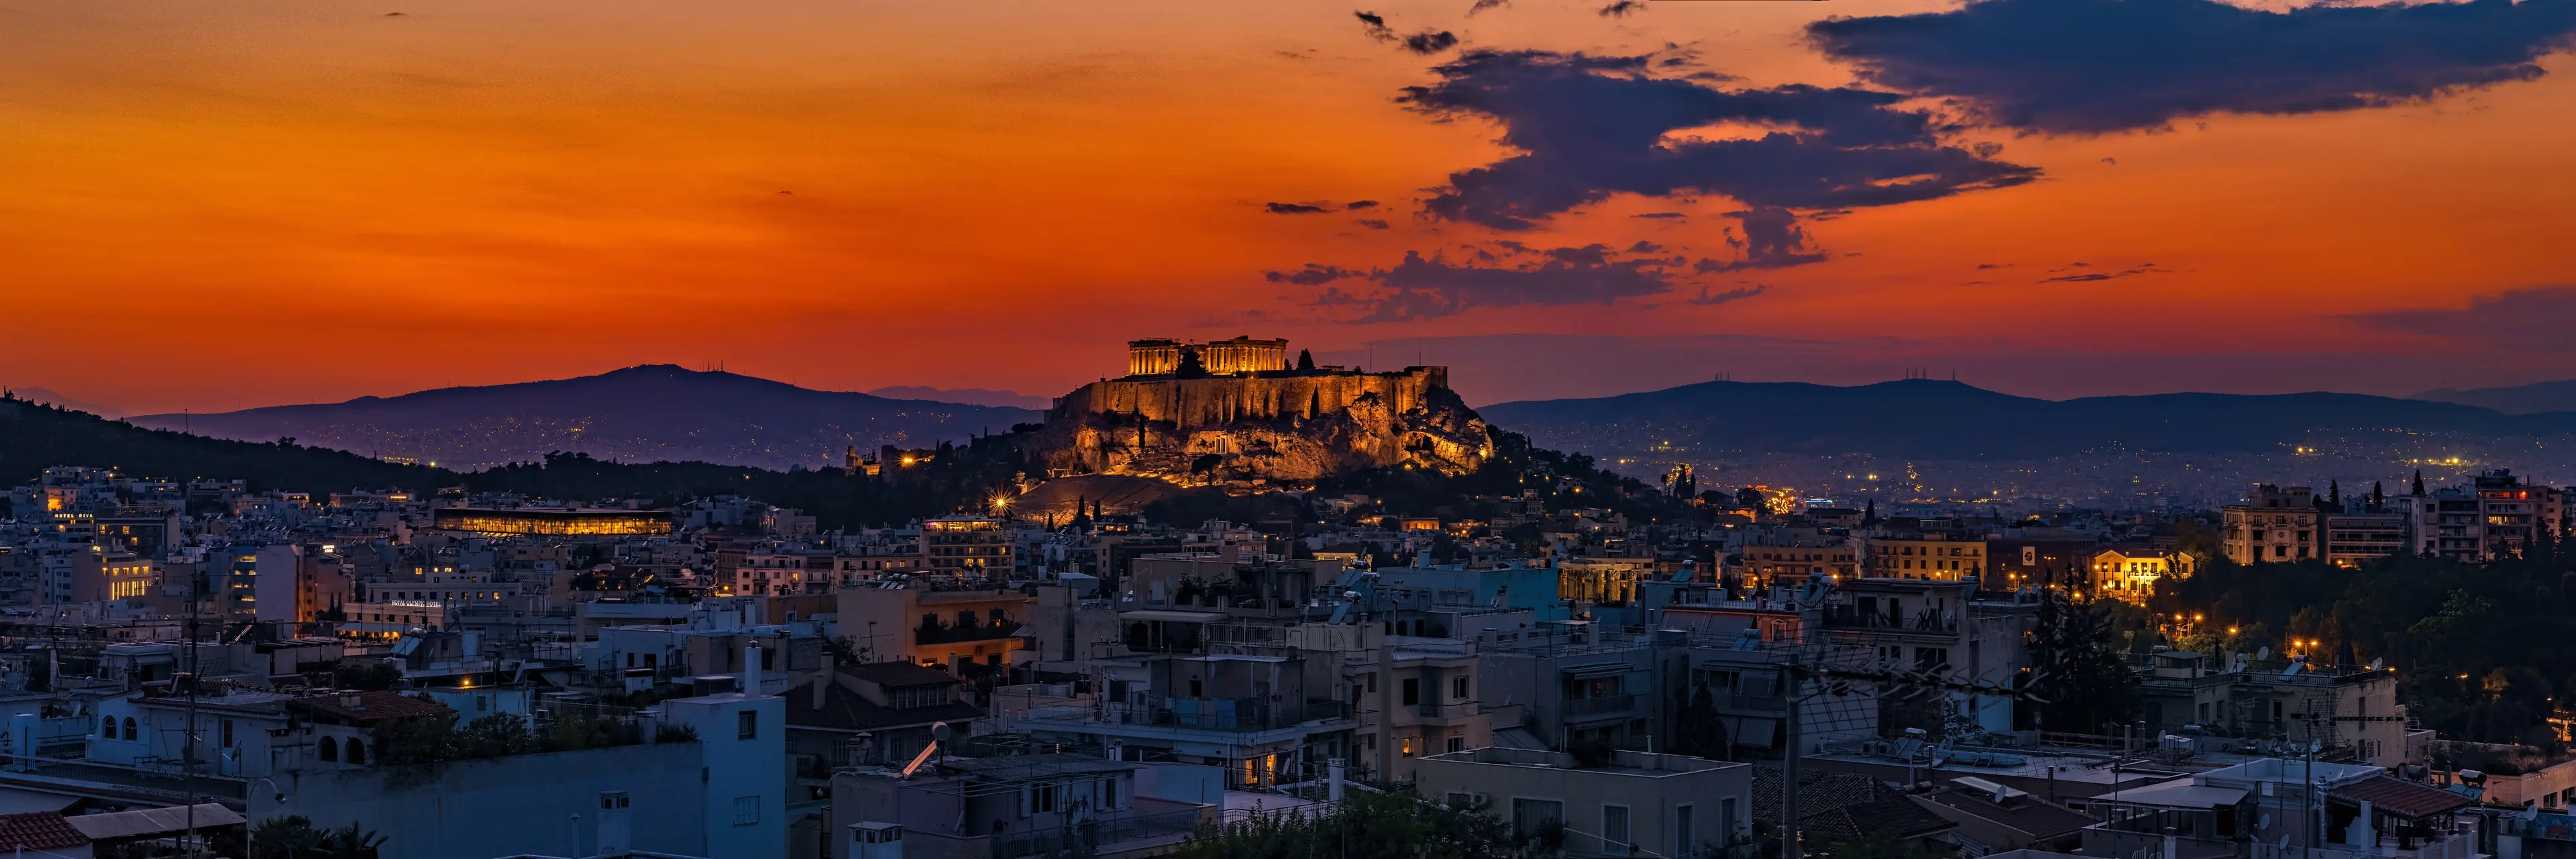 Exploring Hidden Gems: A Family Day in Tranquil Athens